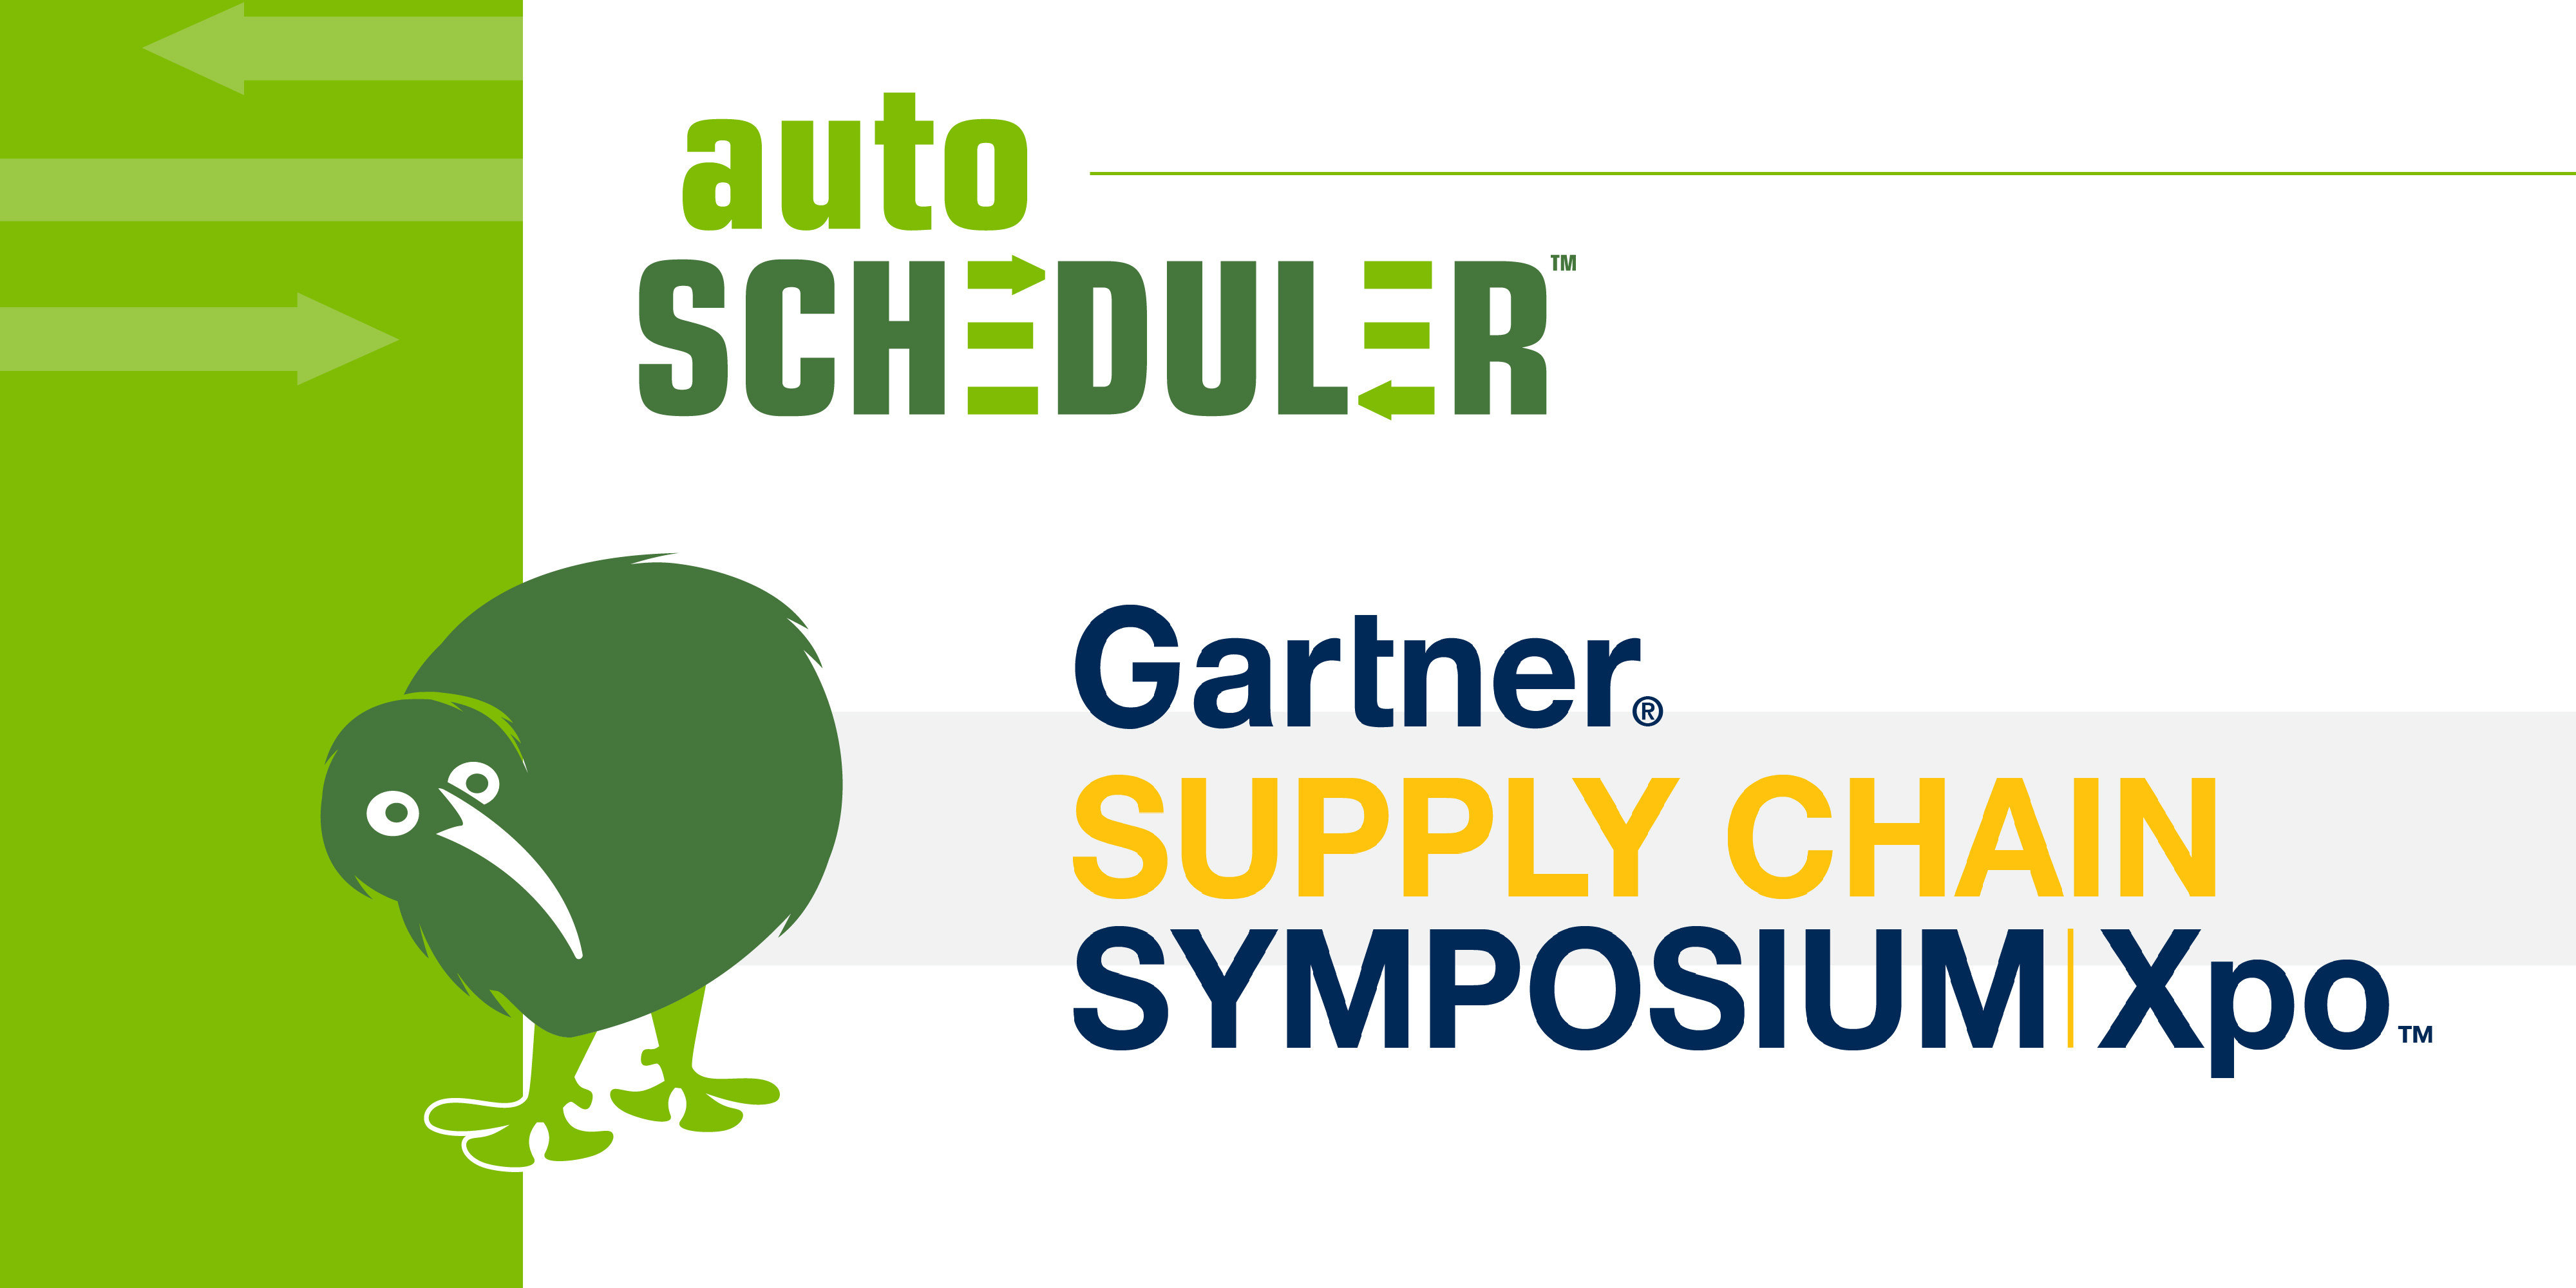 FIVE Enlightening Insights from the Gartner Supply Chain Symposium|Xpo